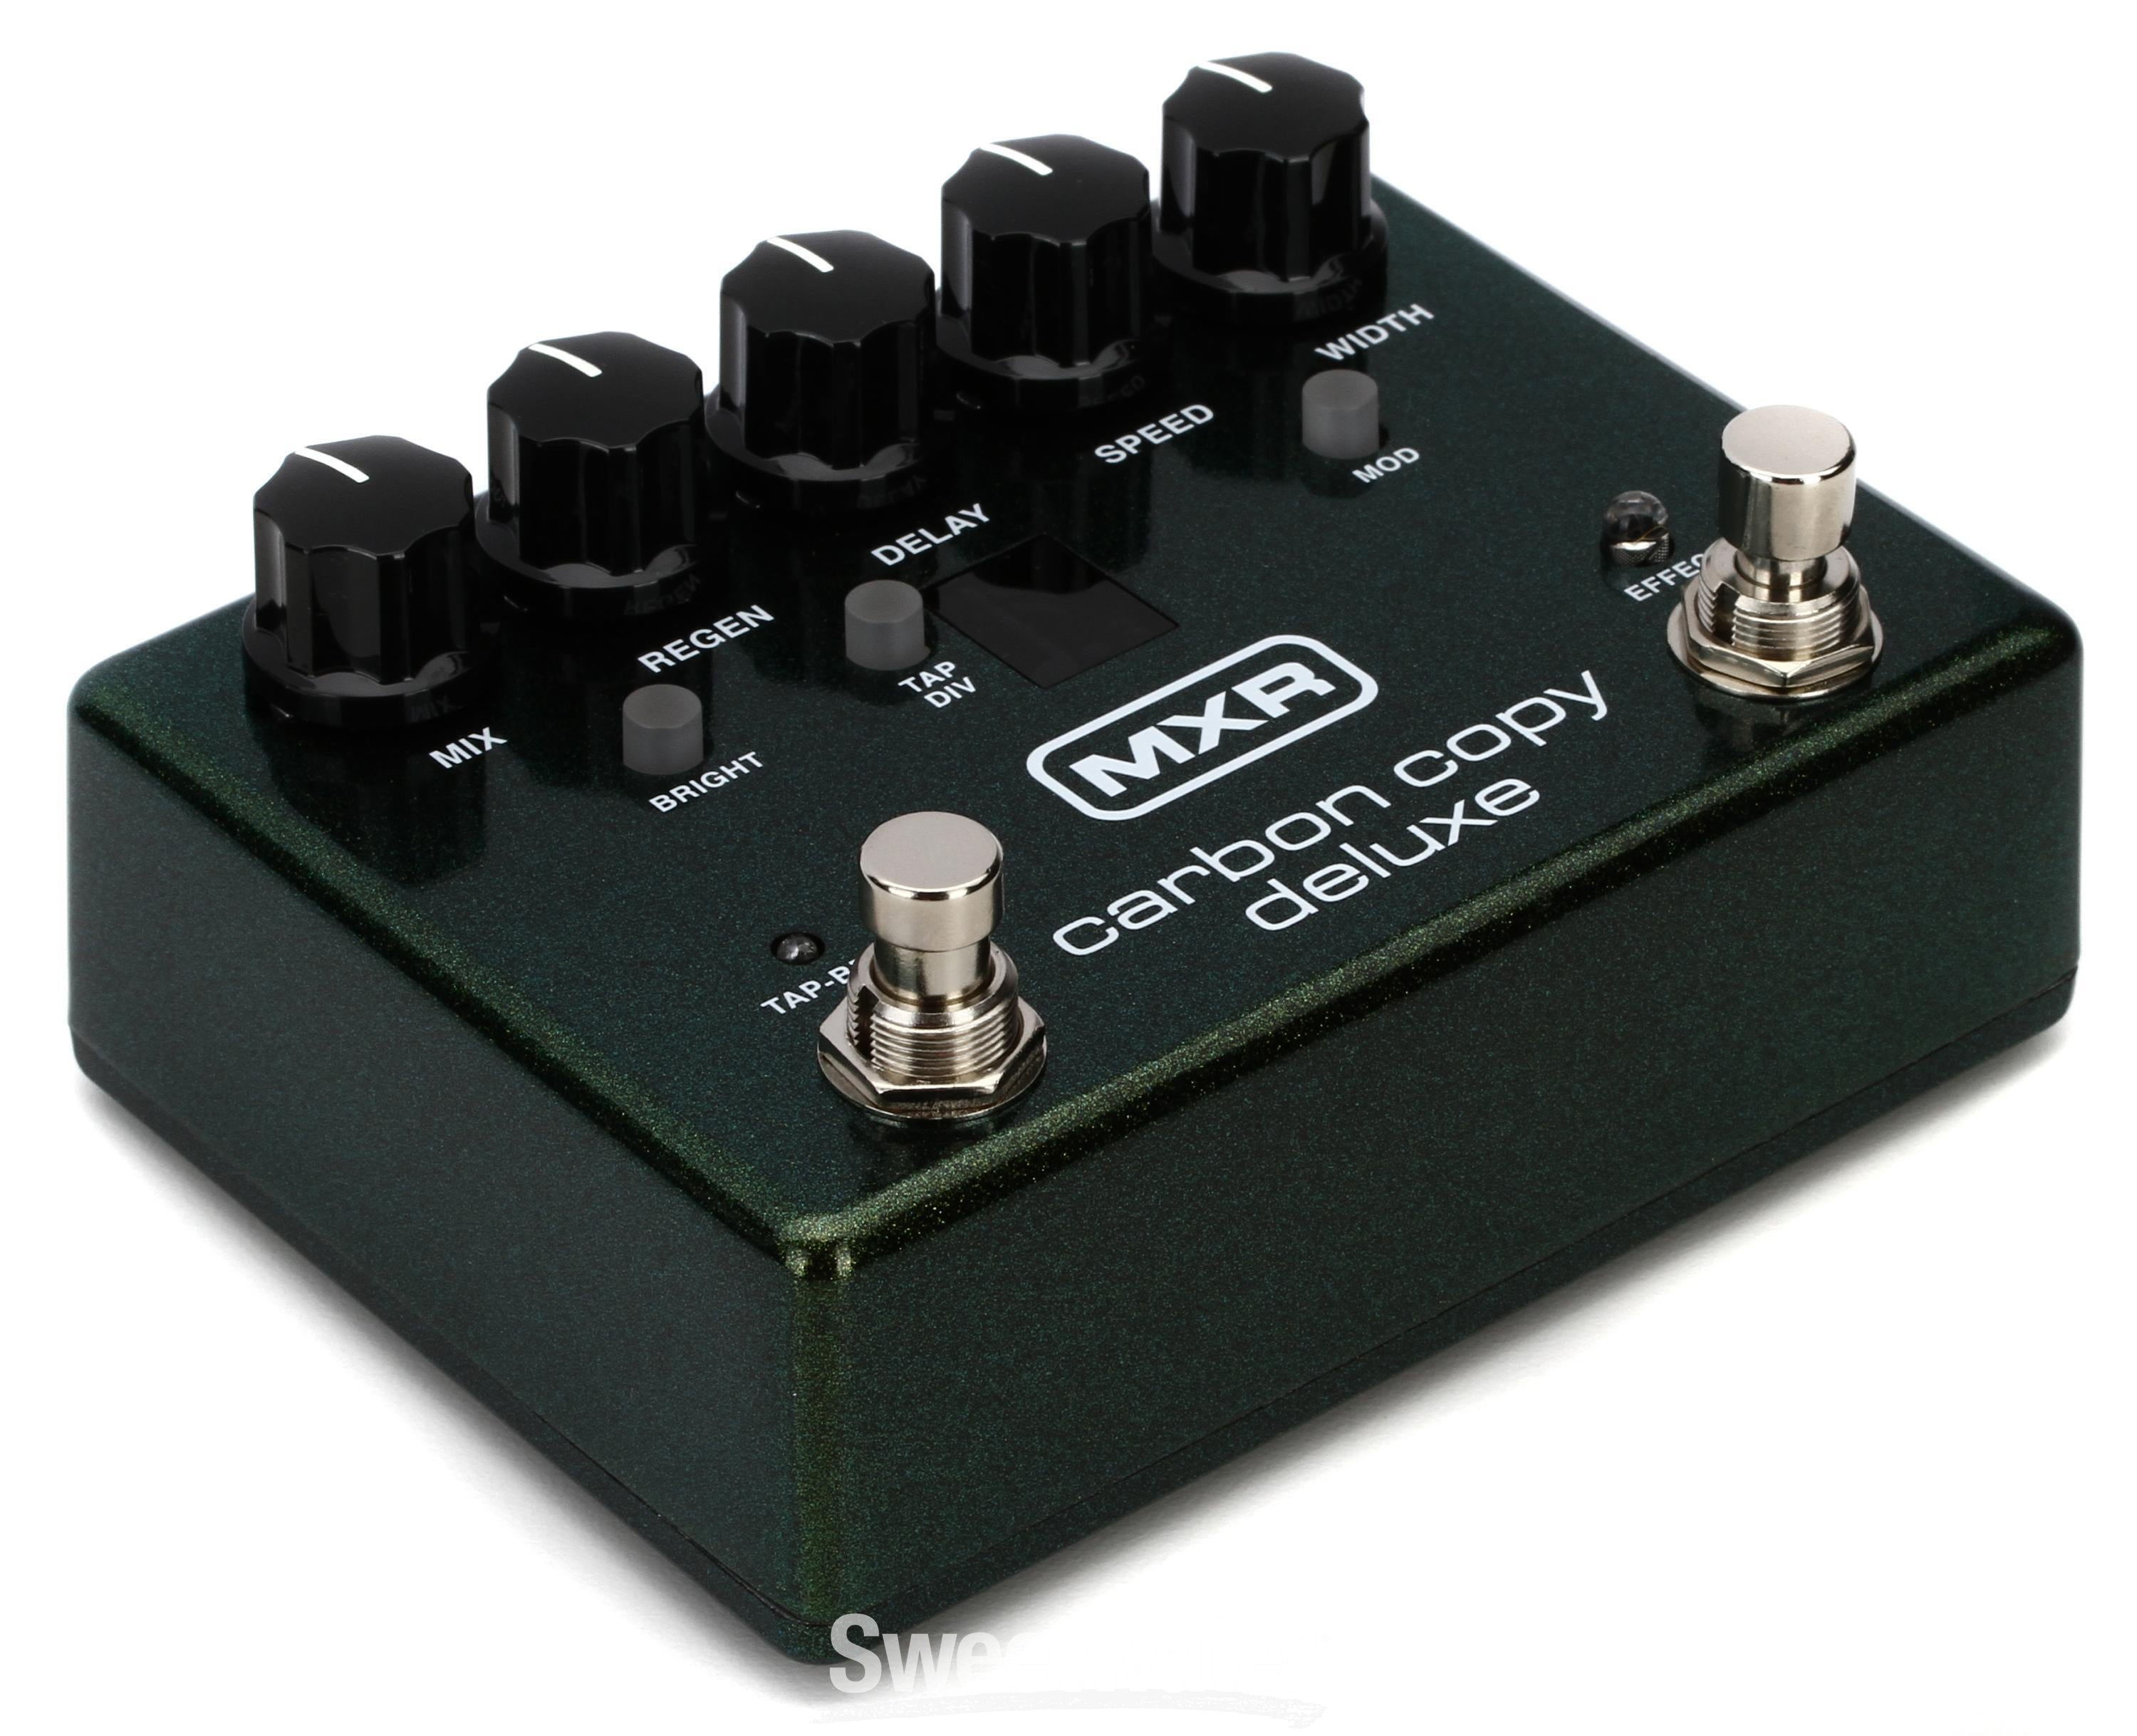 MXR M292 Carbon Copy Deluxe Analog Delay Pedal Reviews | Sweetwater